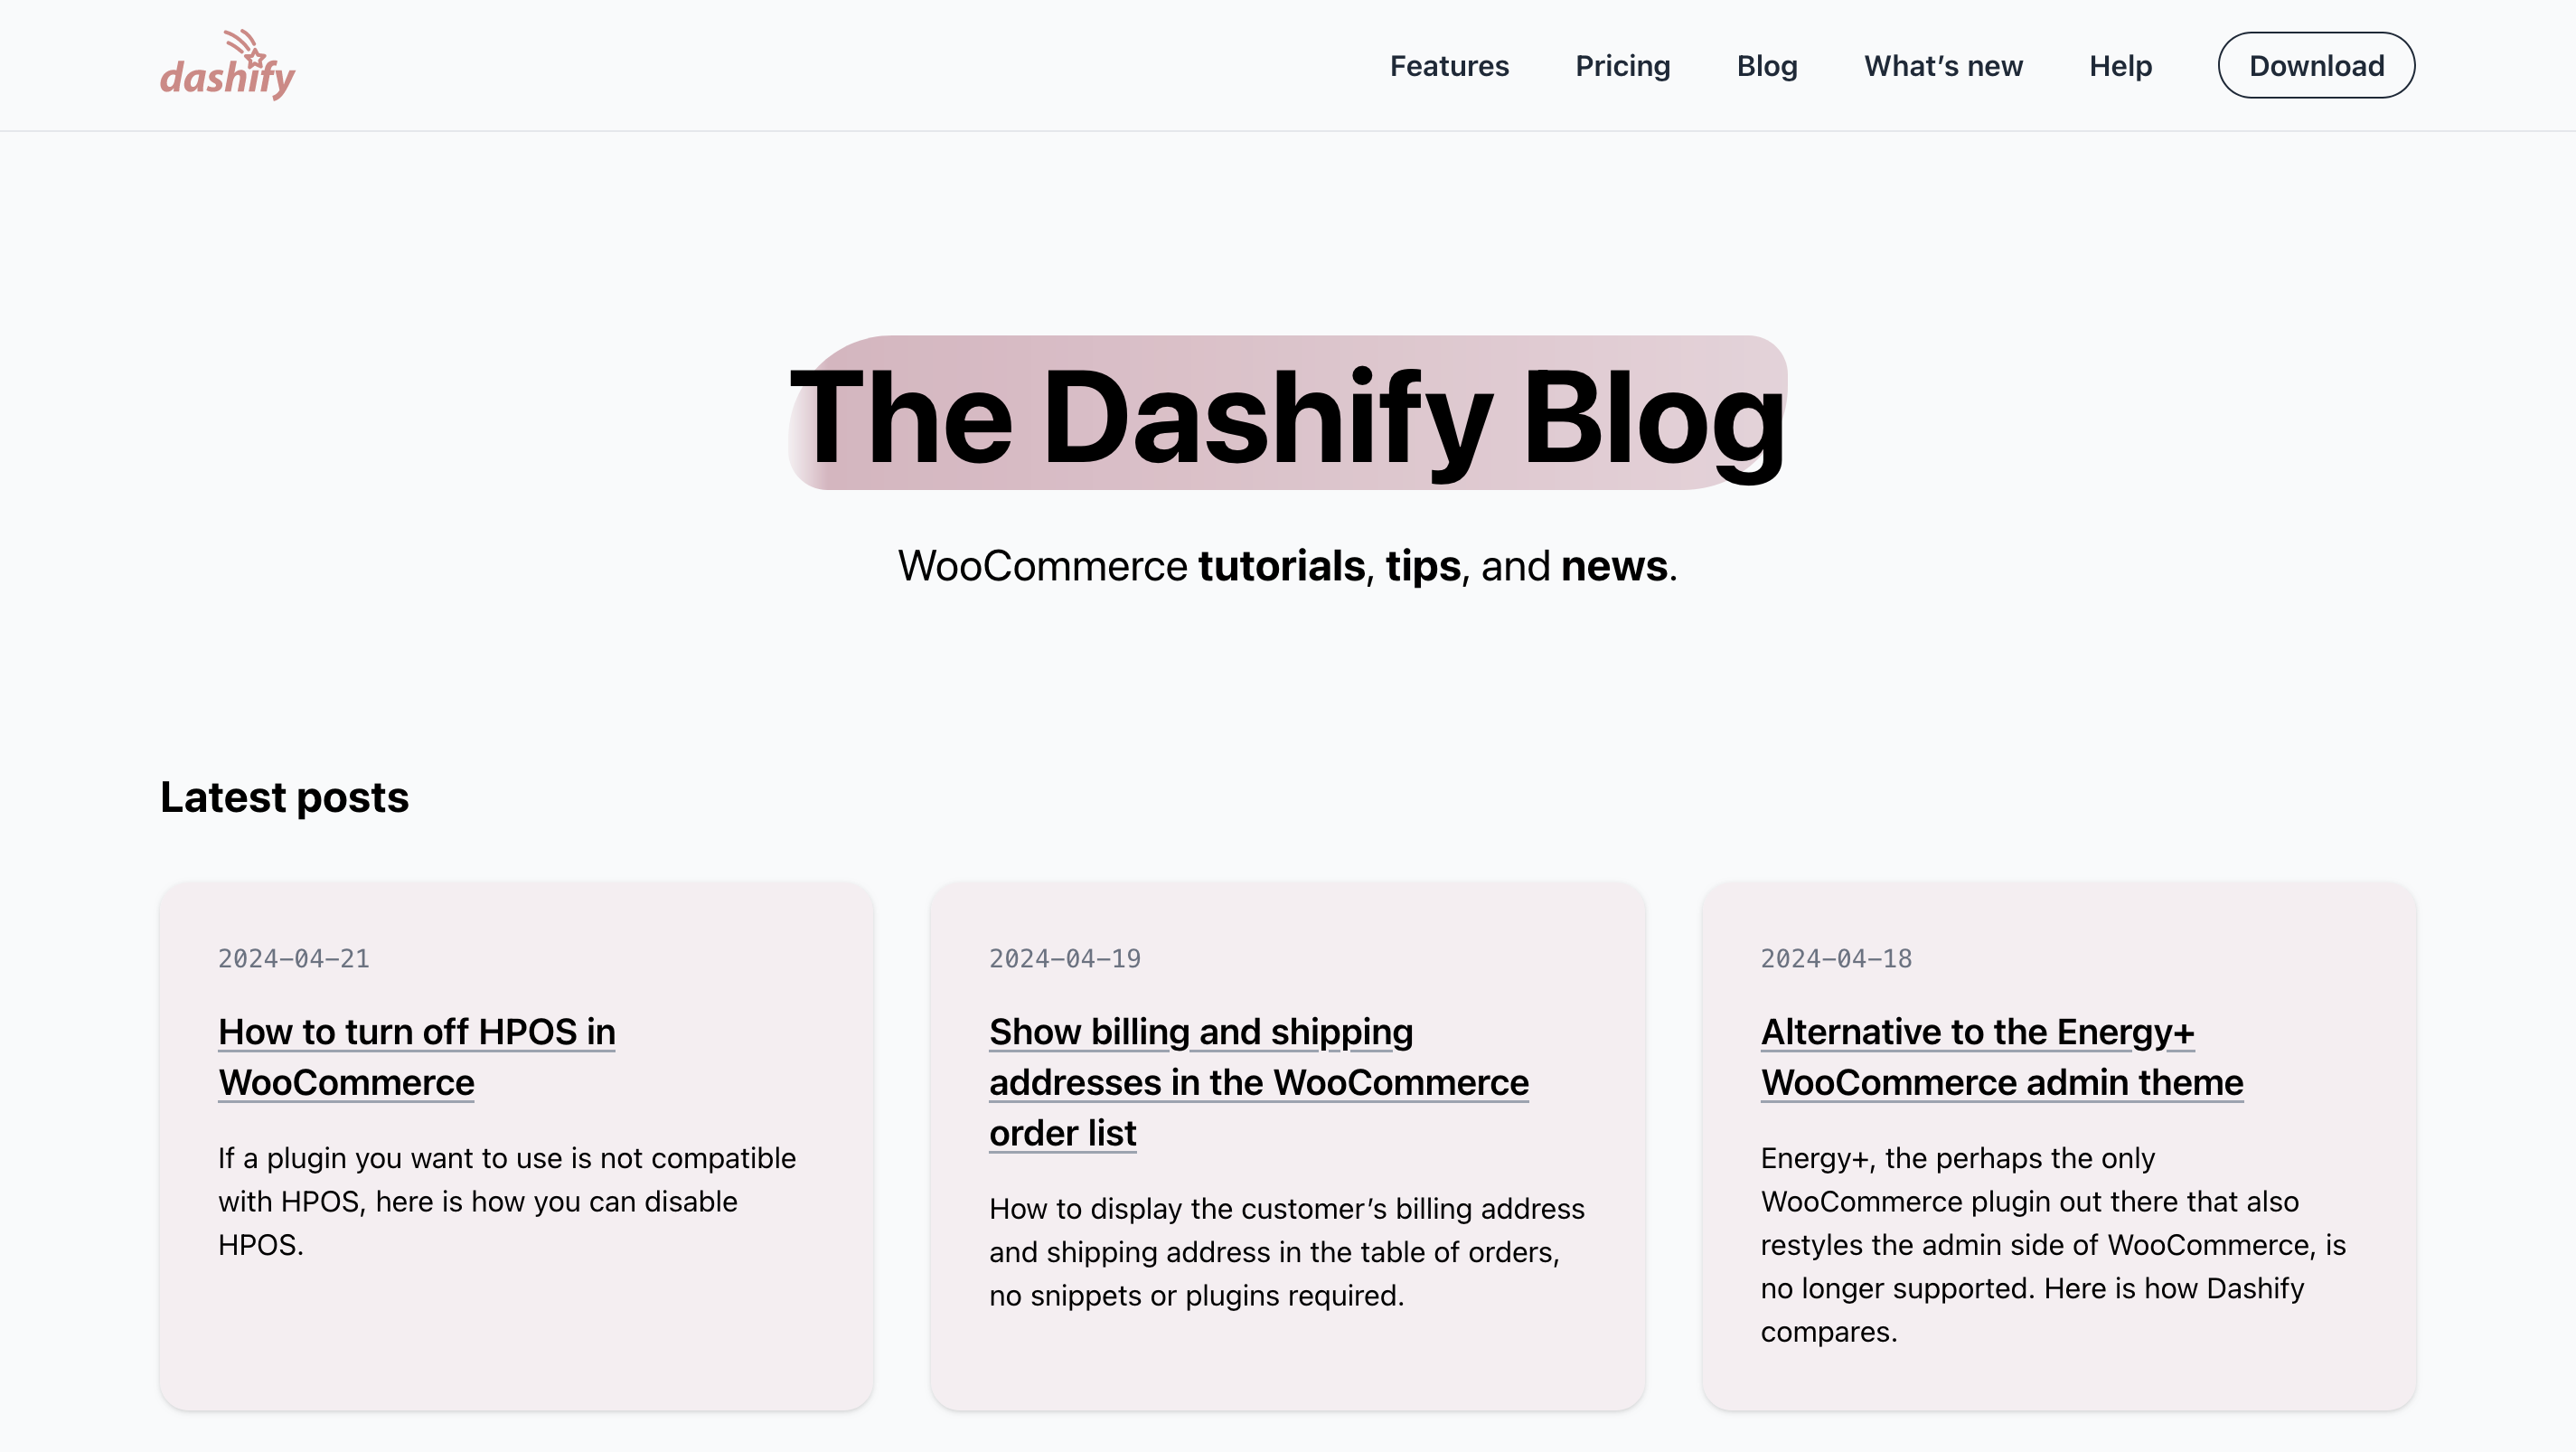 Screenshot of the top of the newly created Dashify blog home. It has a large heading “The Dashify Blog” and a smaller heading “WooCommerce tutorials, tips, and news.” with posts in a grid below that.